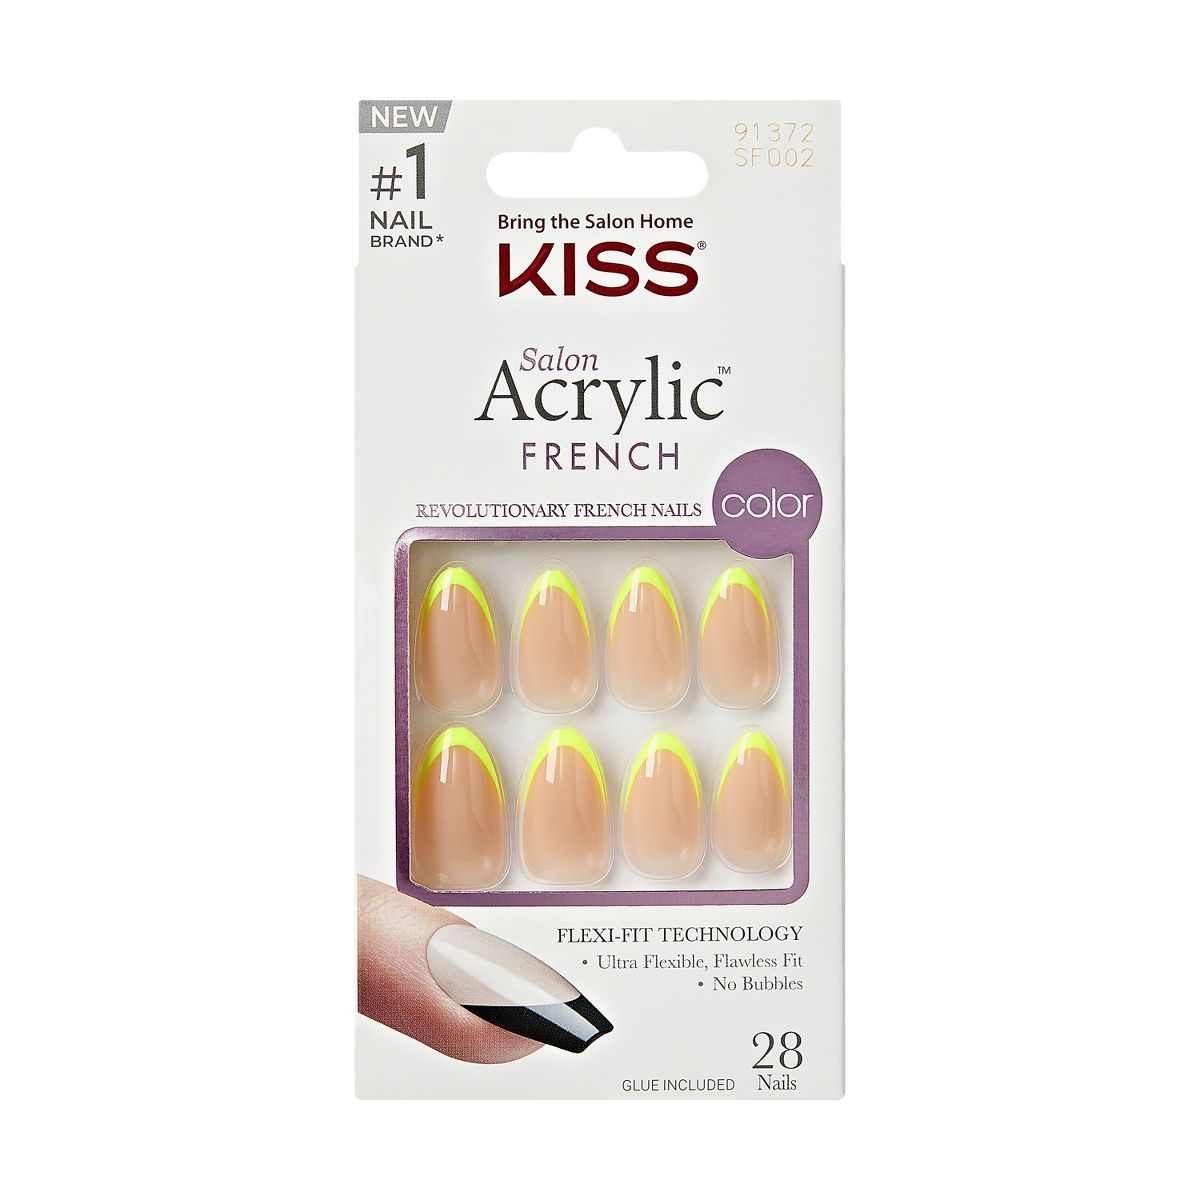 KISS Products Salon Acrylic French Color Fake Nails - Hype - 31ct | Target